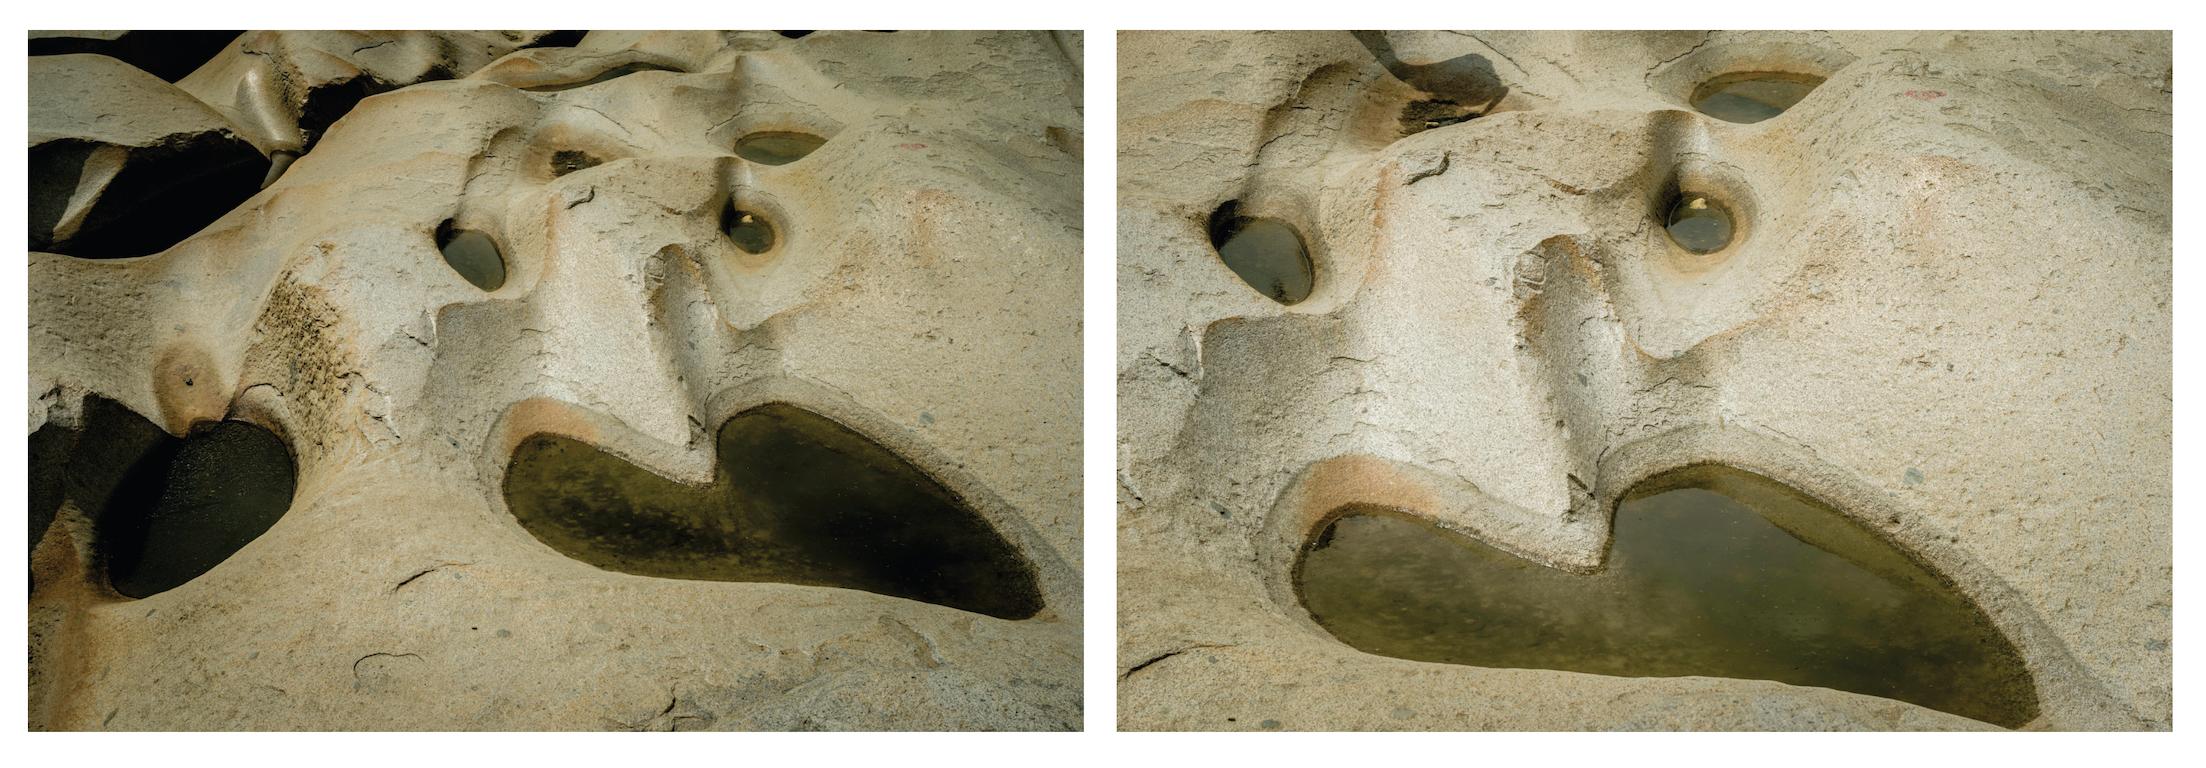 Mauricio Velez Color Photograph - Untitled V and Untitled IV. Abstract rocks landscape color photographs